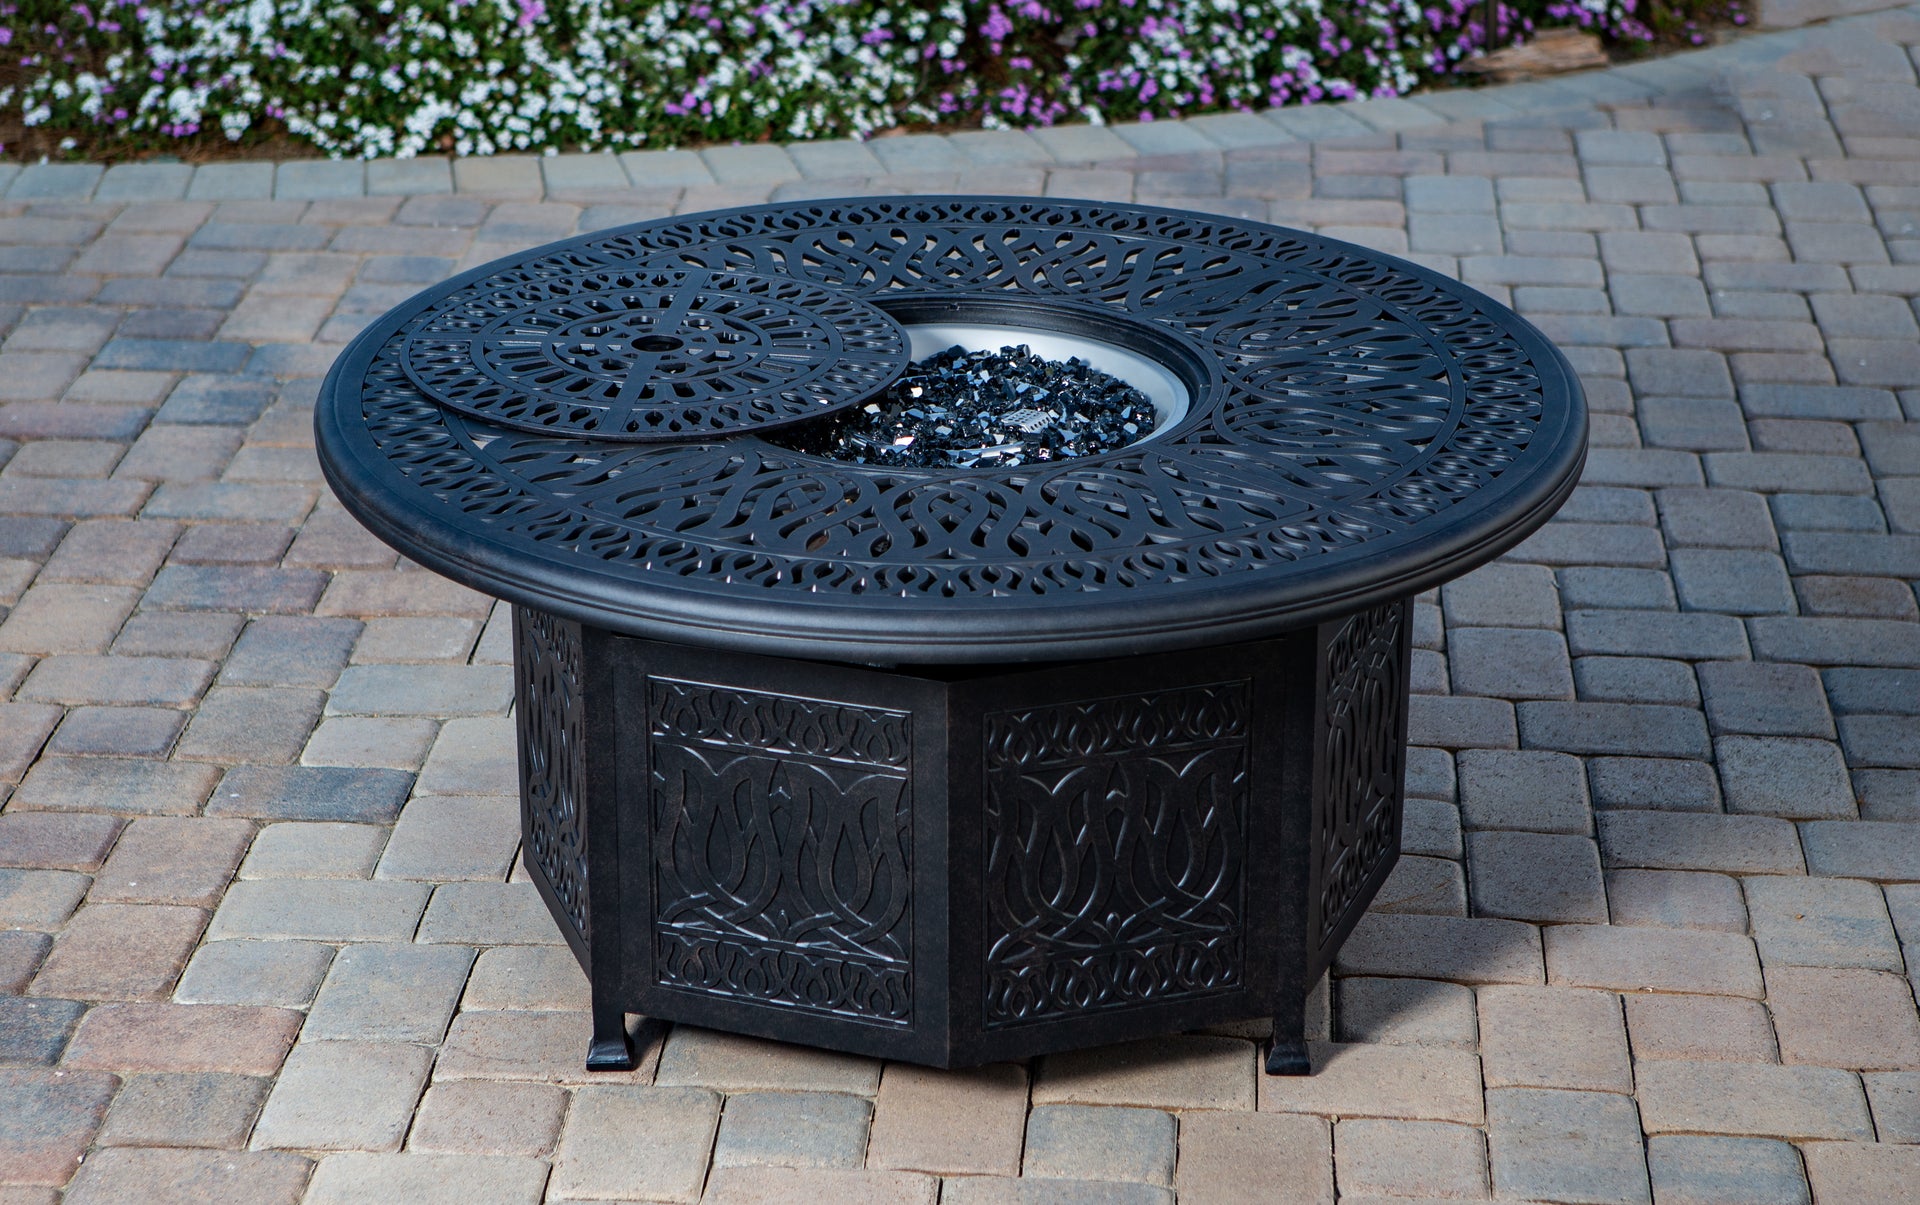 Comfort Care 52" Round Chat Fire Pit Table Weave with Burner Or Ice Bucket - Senior.com Fire Tables